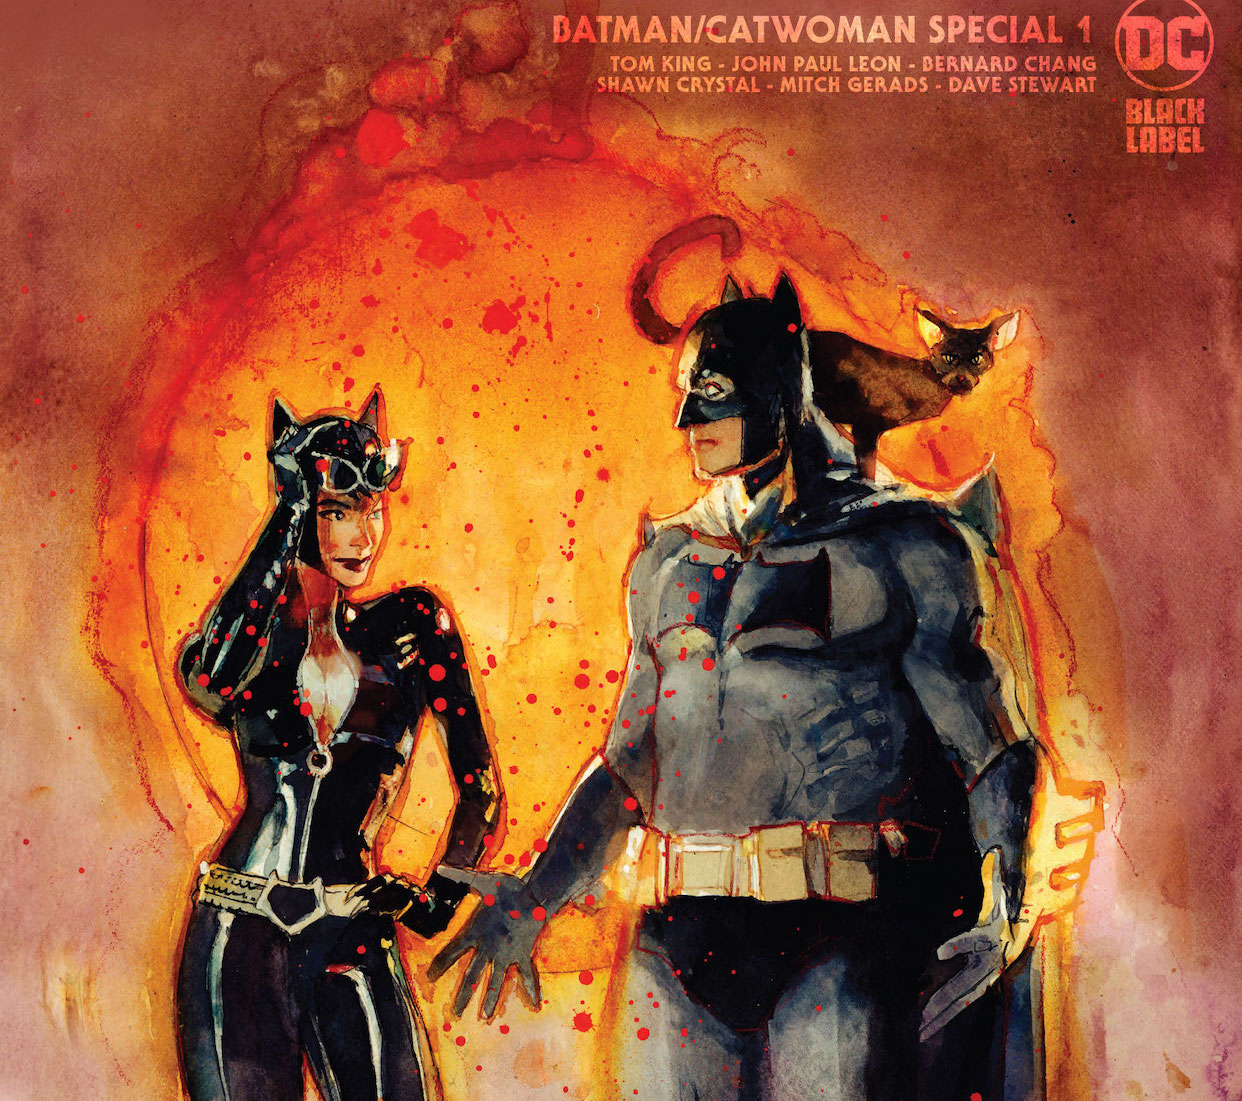 'Batman/Catwoman Special' #1 is a touching ode to John Paul Leon and Catwoman